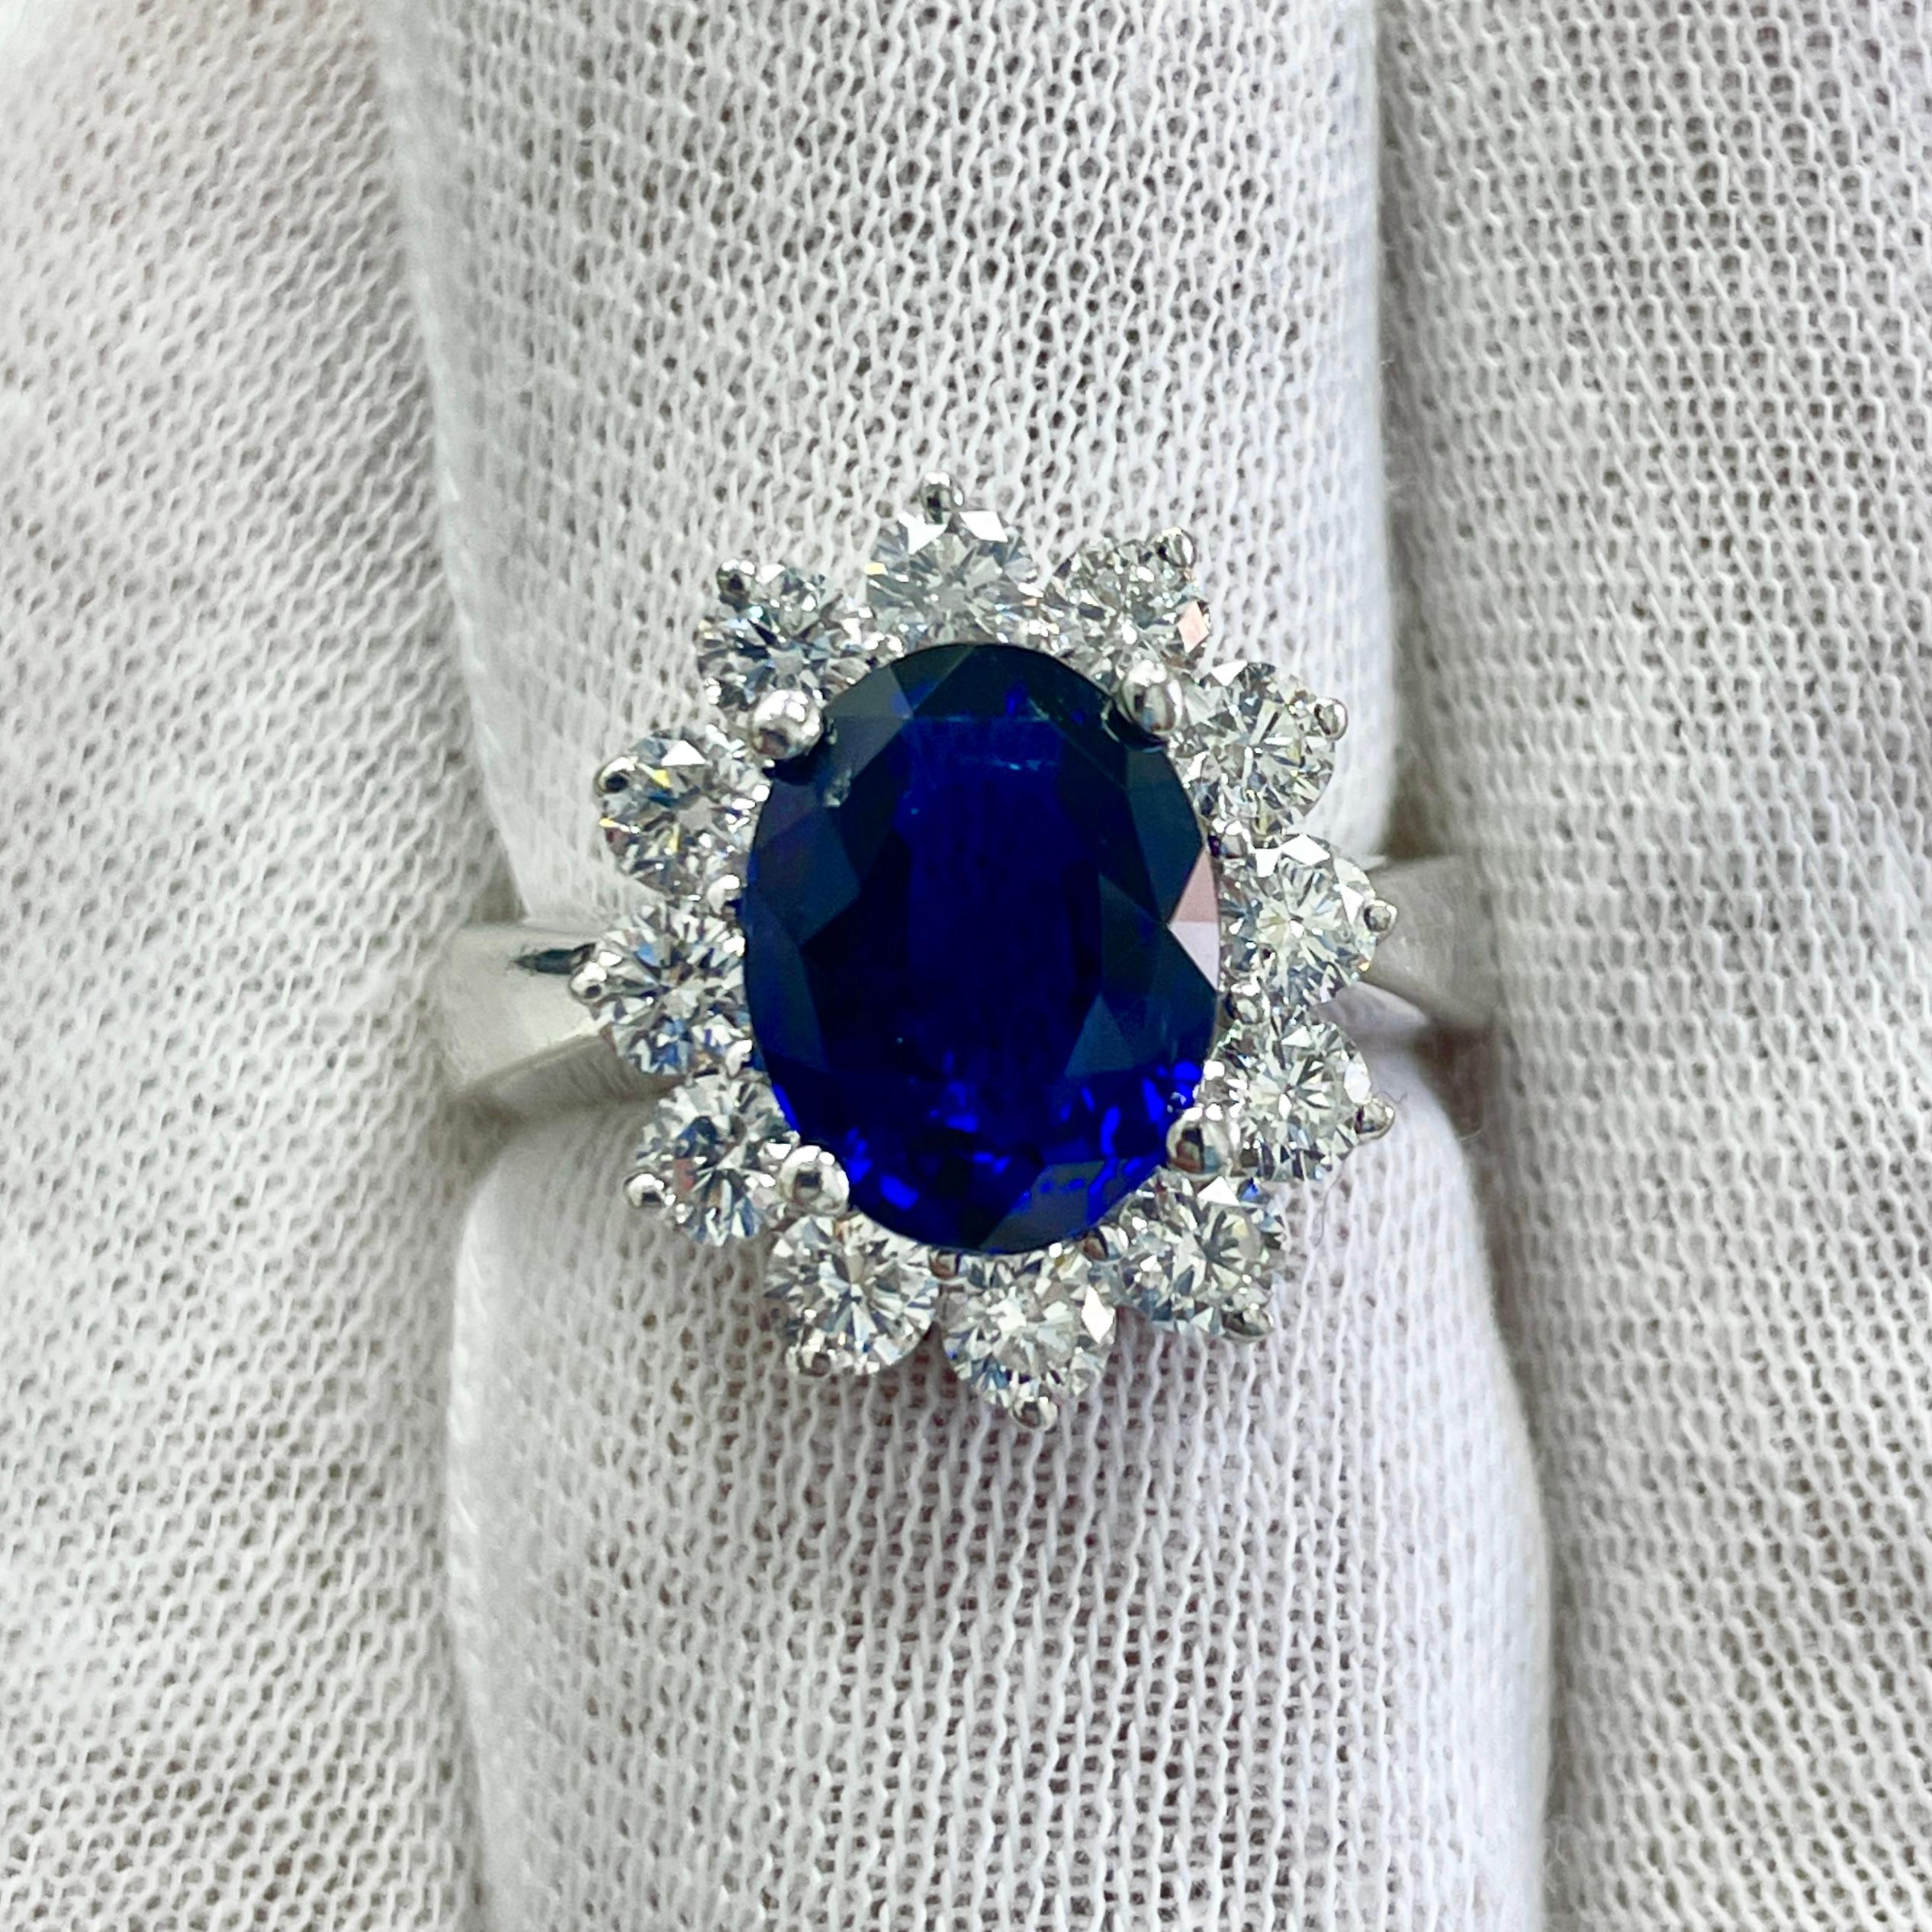 This is a vivid blue oval sapphire mounted in an elegant 14K white gold ring with 1.39Ct of brilliant white diamonds. Suitable for any occasion!